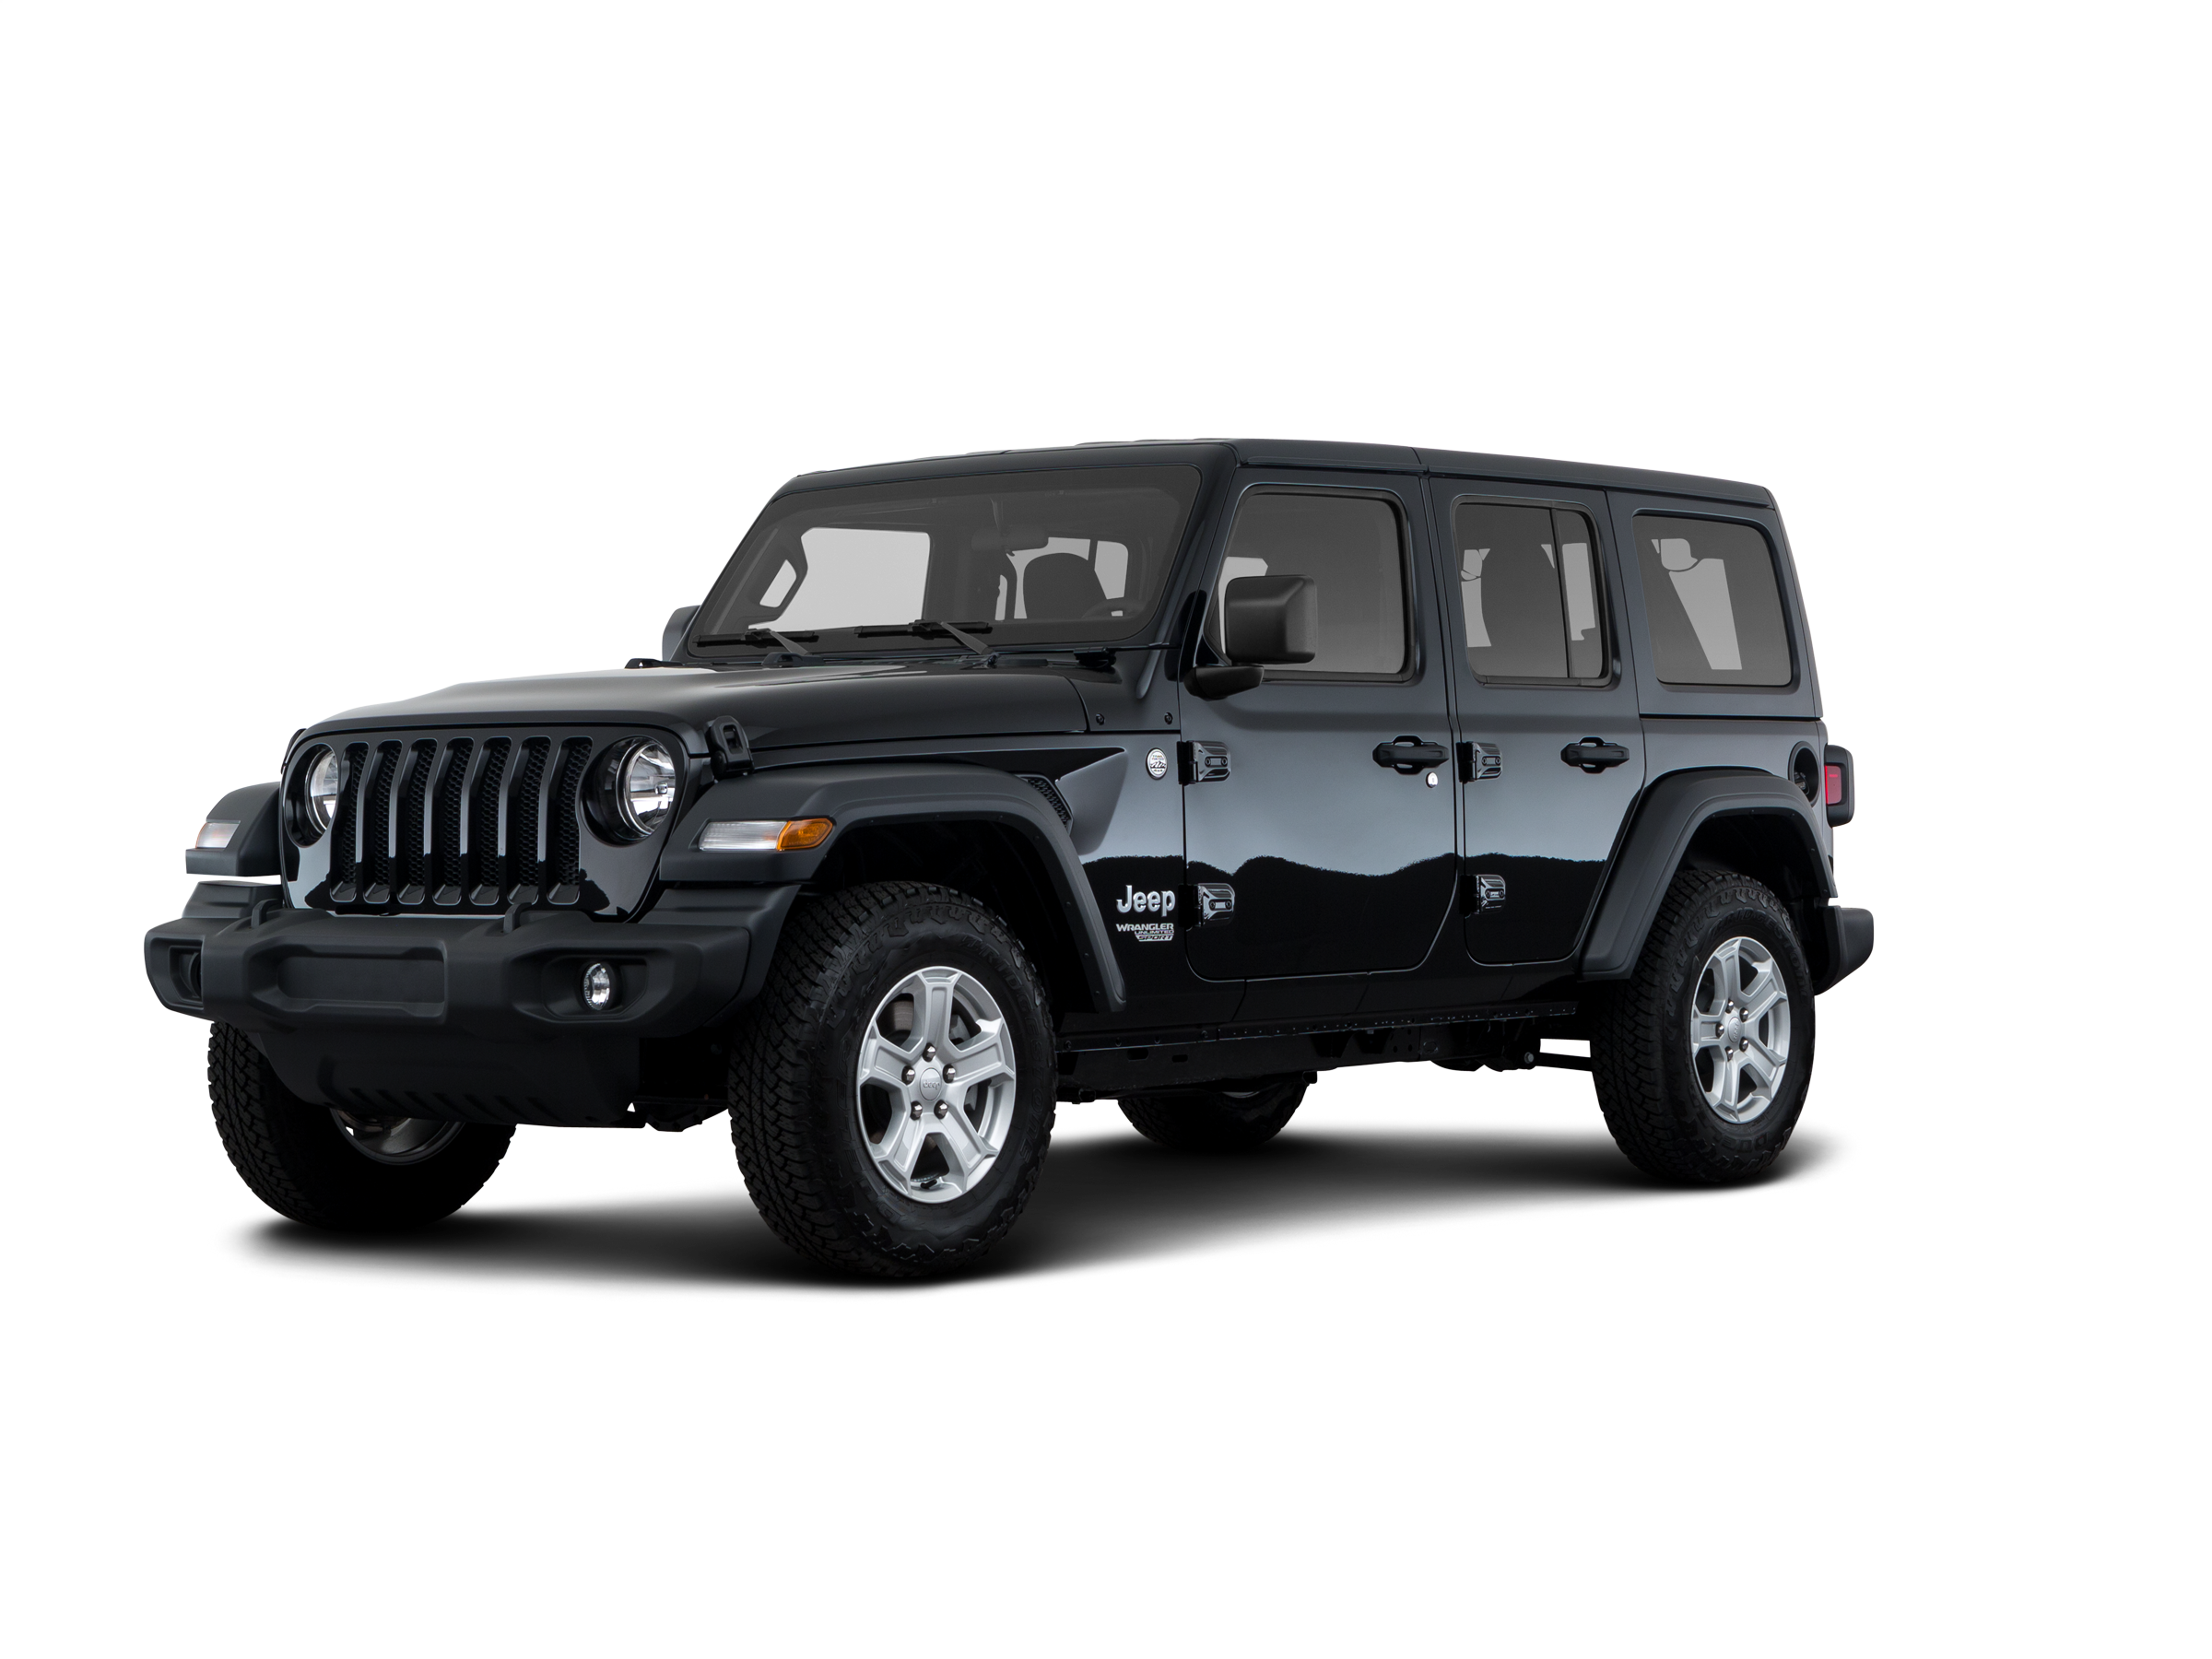 2020 Jeep Wrangler Unlimited Specs, Features & Options | Kelley Blue Book